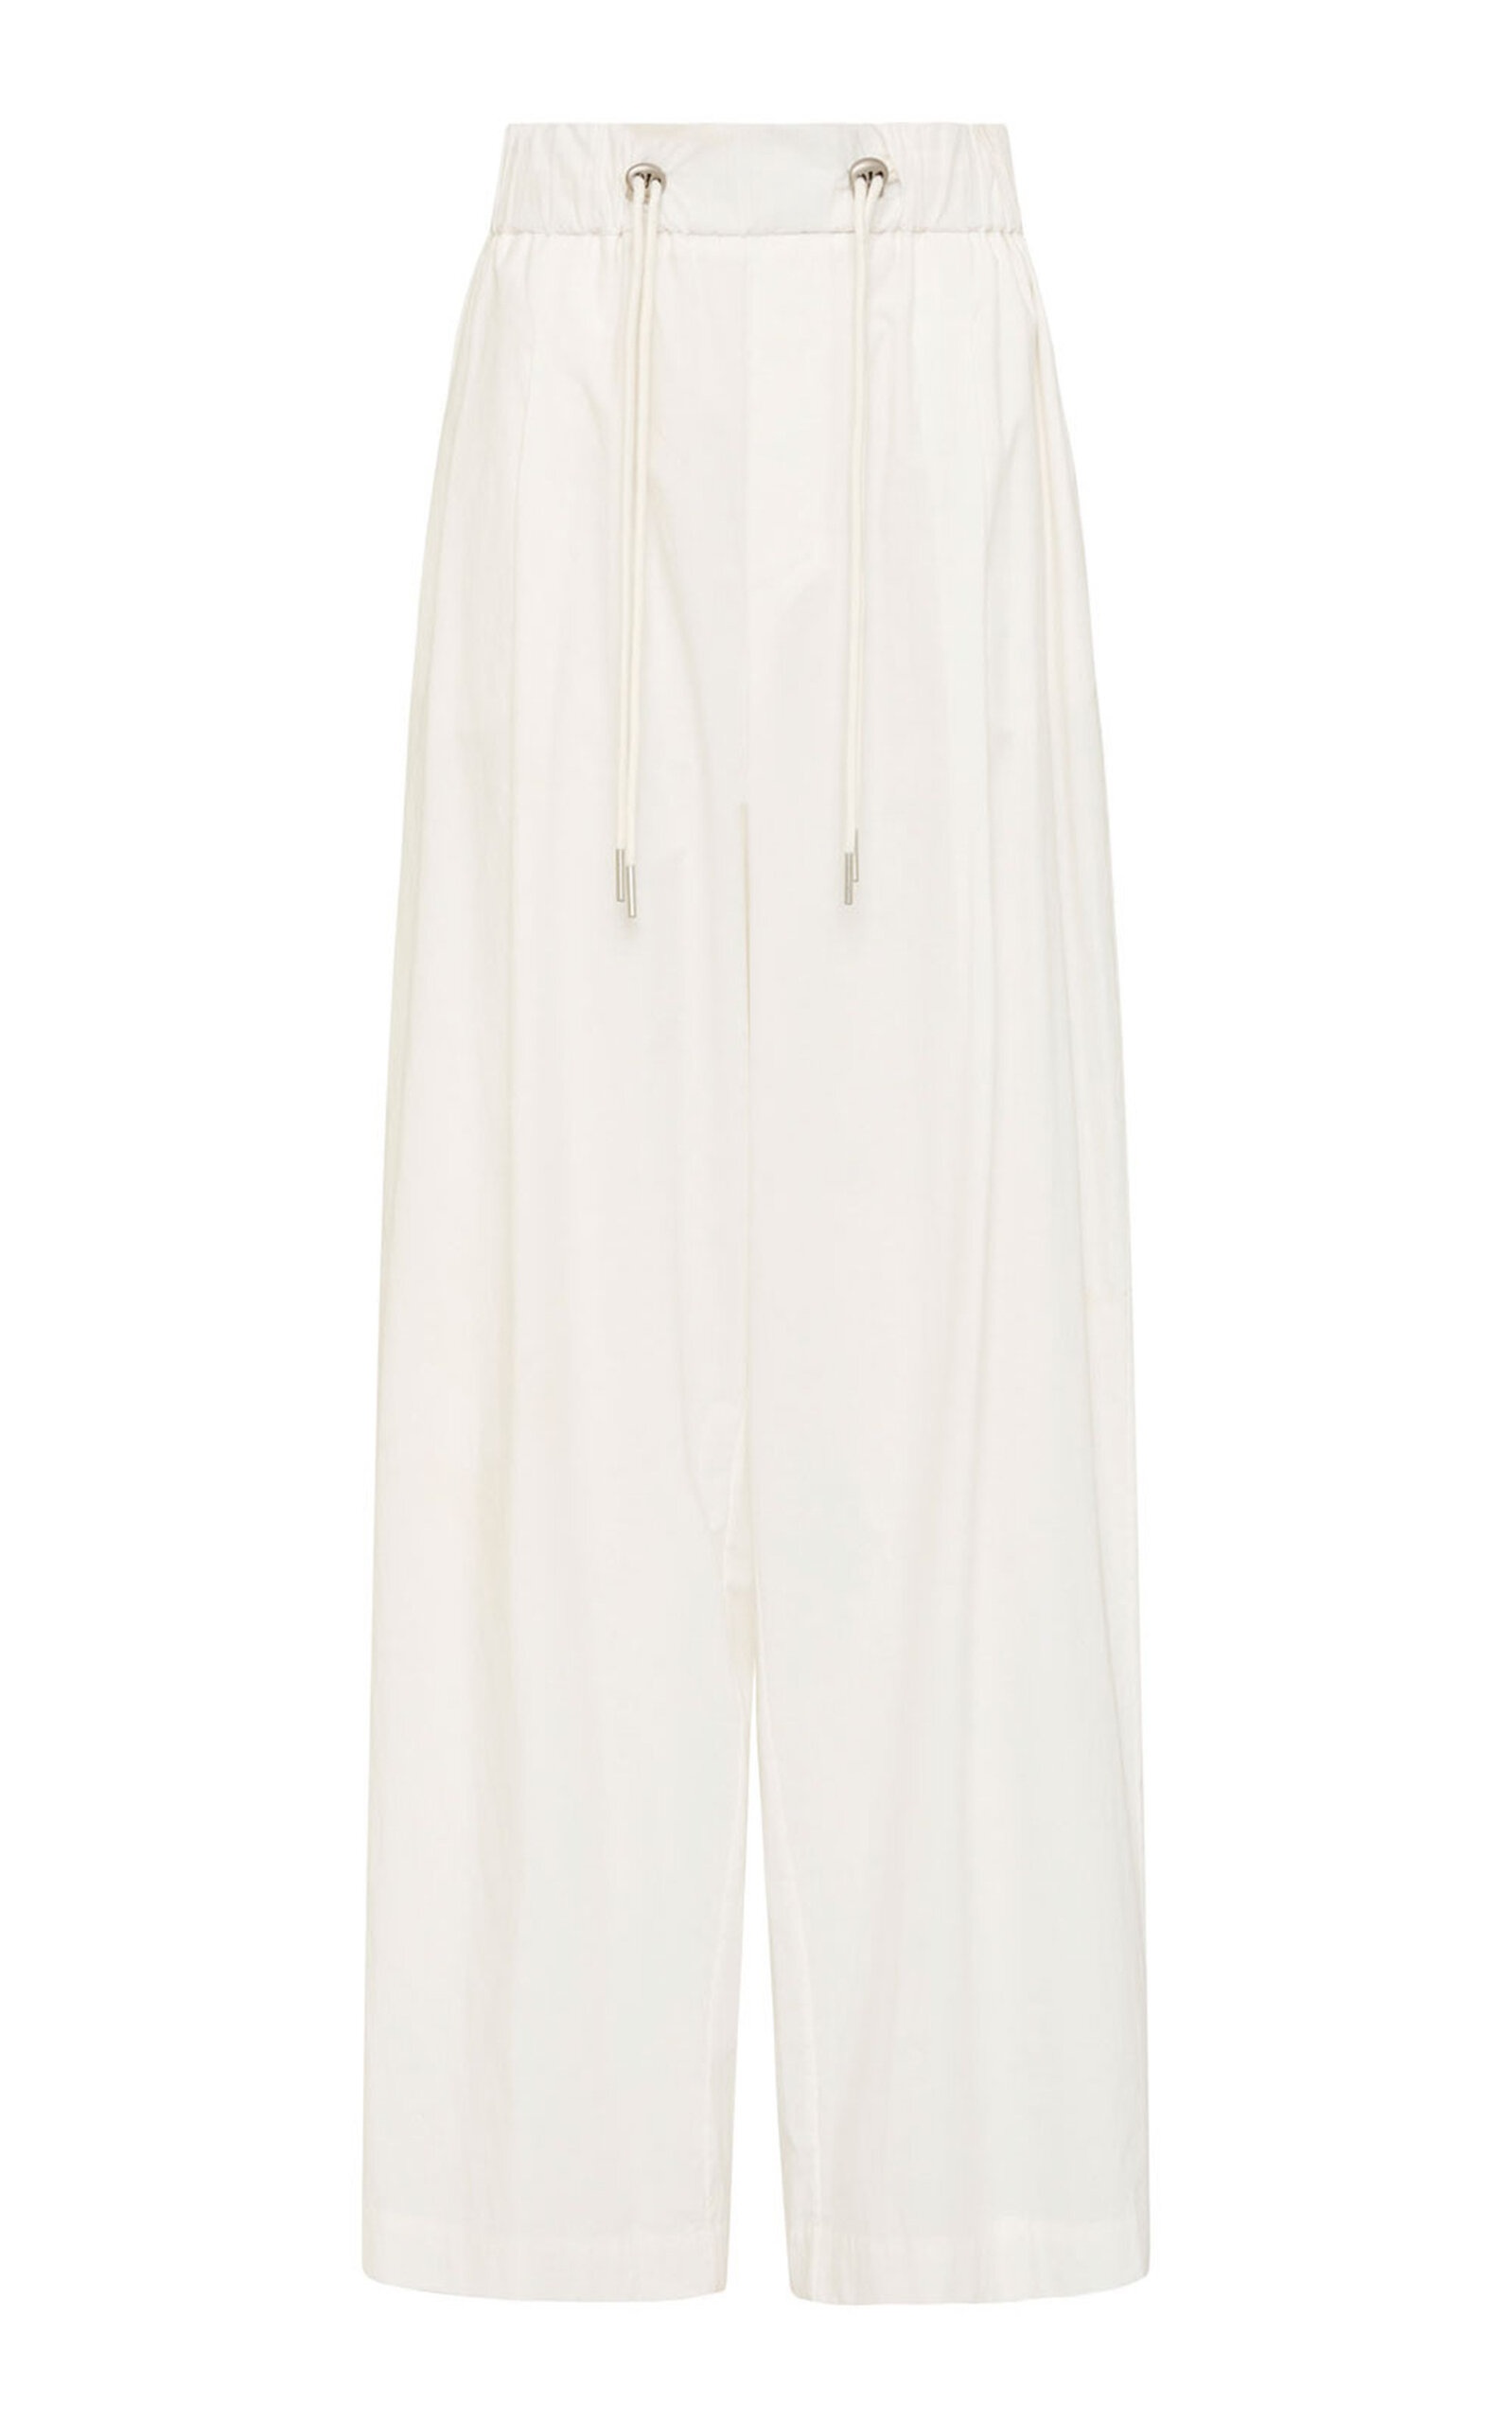 Relaxed Drawstring Cotton Pants white - 1